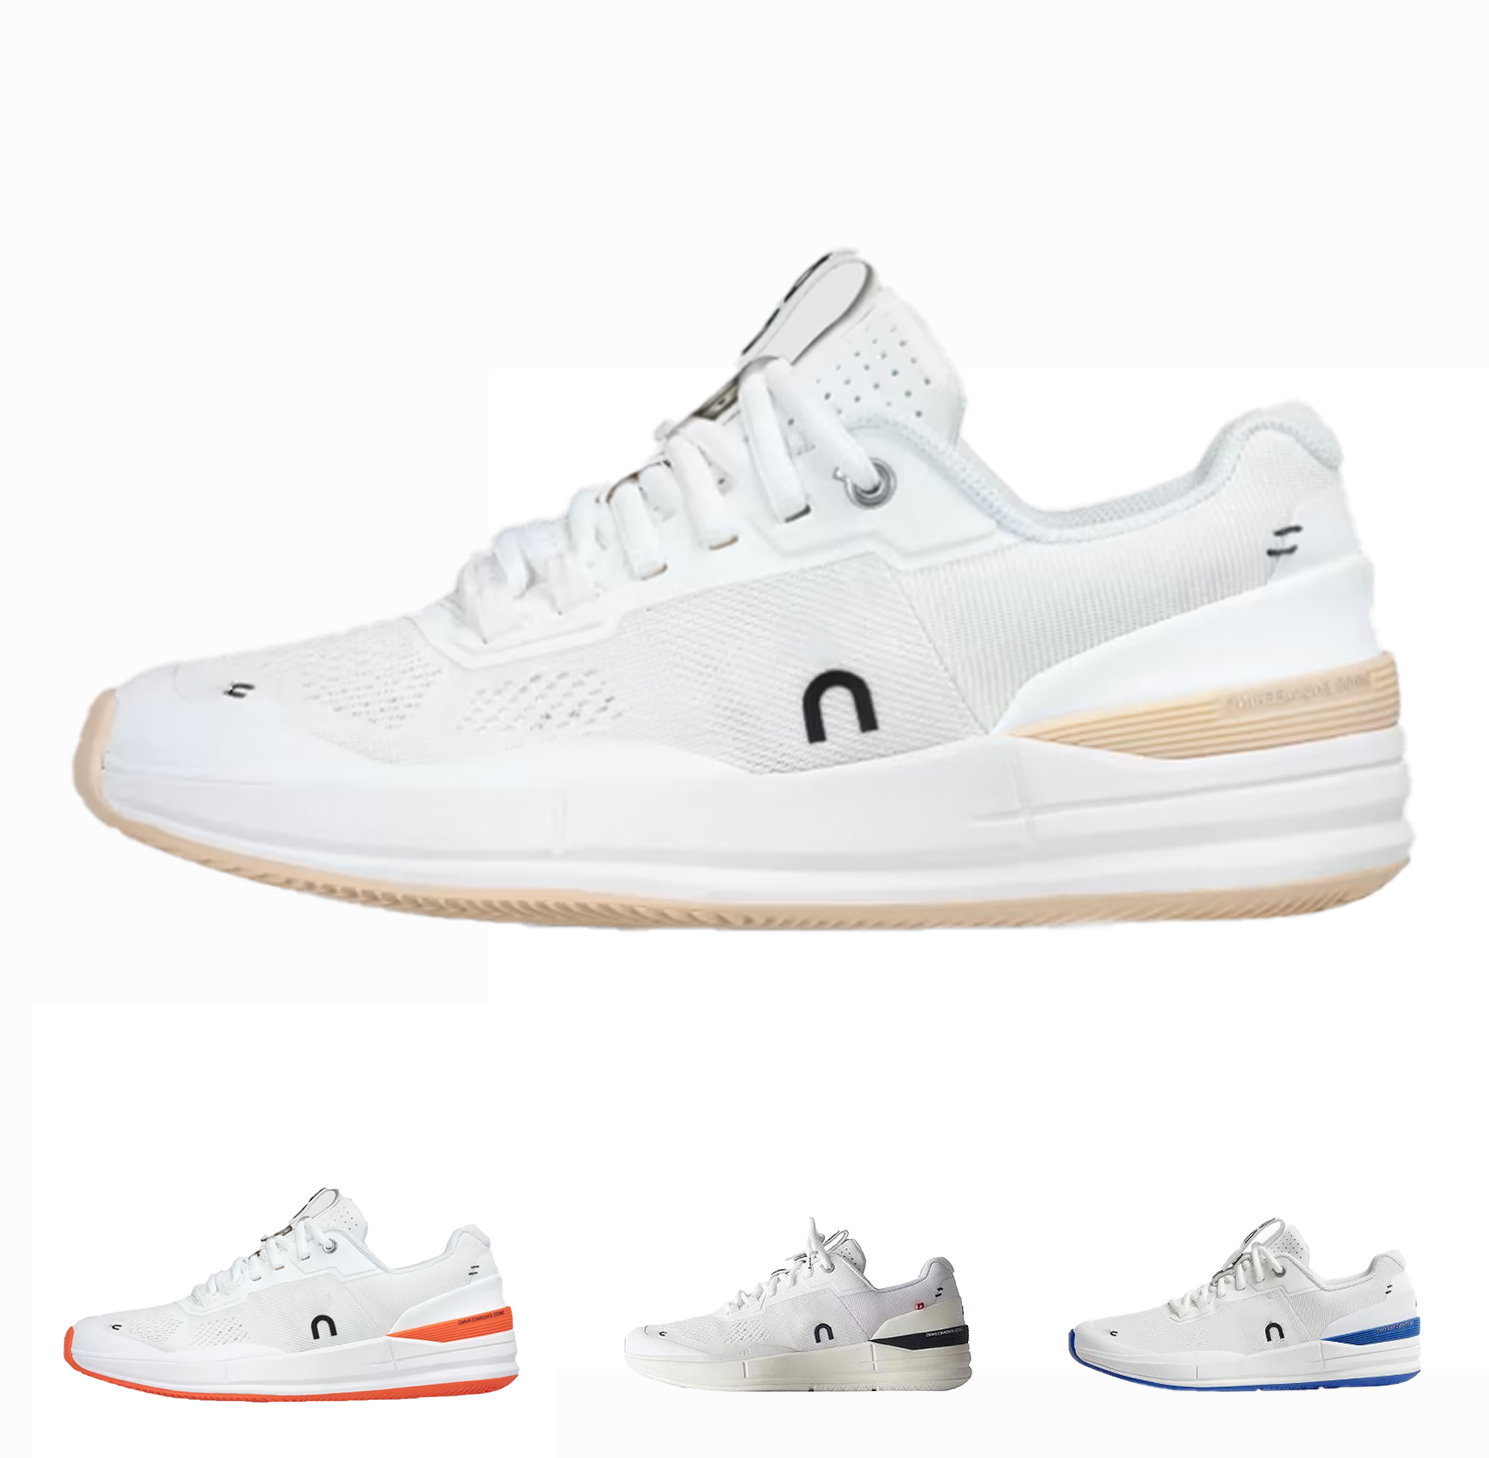 

Federer x On The Roger Rro nova Form Tennis Shoes X 5 womans on Federer Running 2023 man Shock Girls s Training sneakers women RUN dhgate sneakers RUN dhgate boots, White chambray